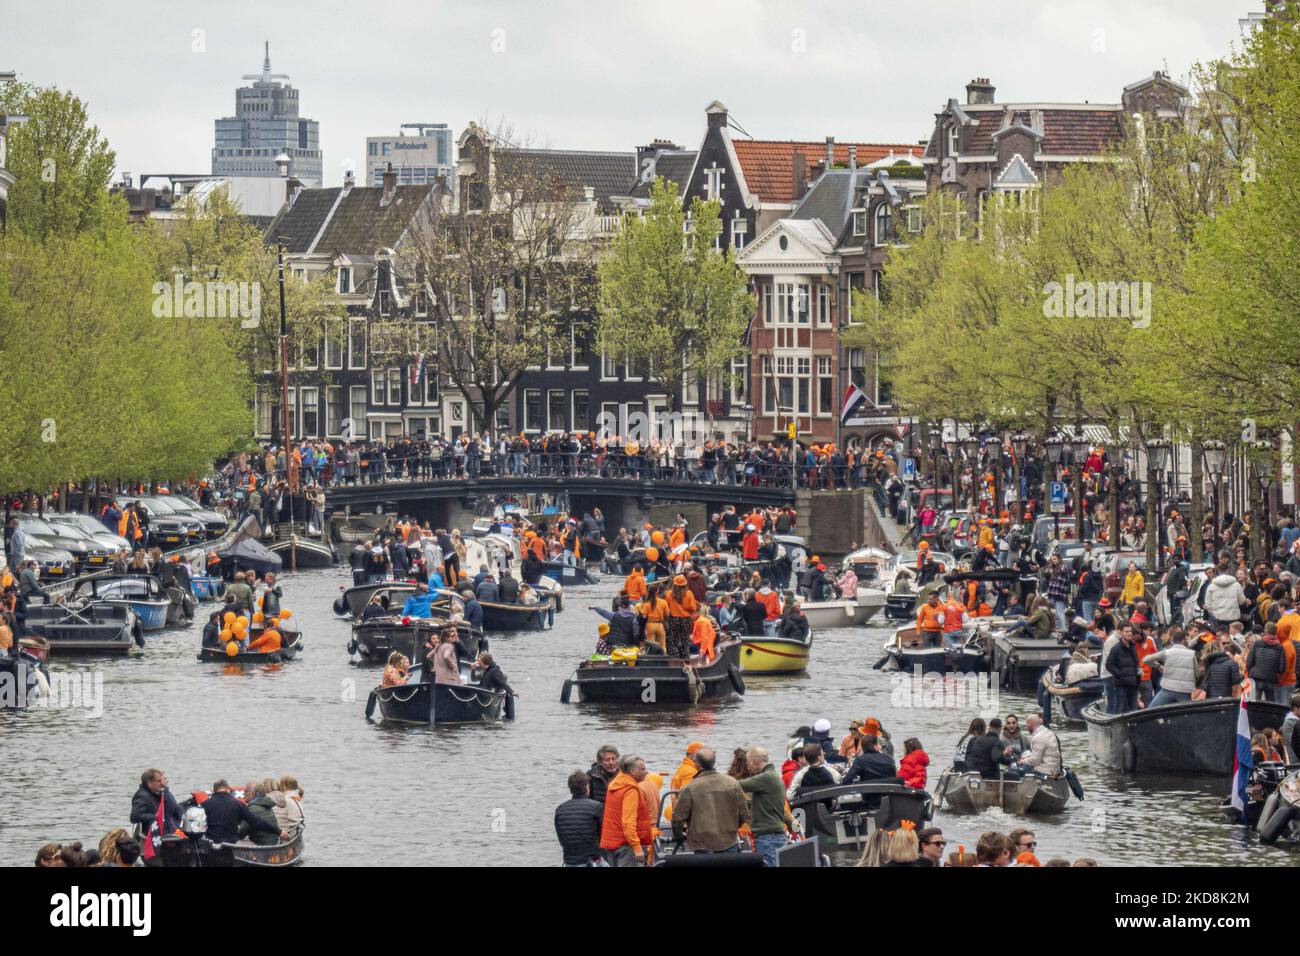 The Netherlands celebrates King's Day after two years of cancellation due to the COVID-19 Coronavirus pandemic and the lockdown restrictions and measures. Thousands of locals and visitors visited the canals of Amsterdam to celebrate with various festivities the birthday of King Willem-Alexander known as Koningsdag, a Dutch national holiday. All kind of boats and vessels are seen in the canals passing under the famous bridges and near the narrow houses of Amsterdam with people on the dancing and having fun. The boats parade down in the inner city canals while travelers gather on the streets. Du Stock Photo